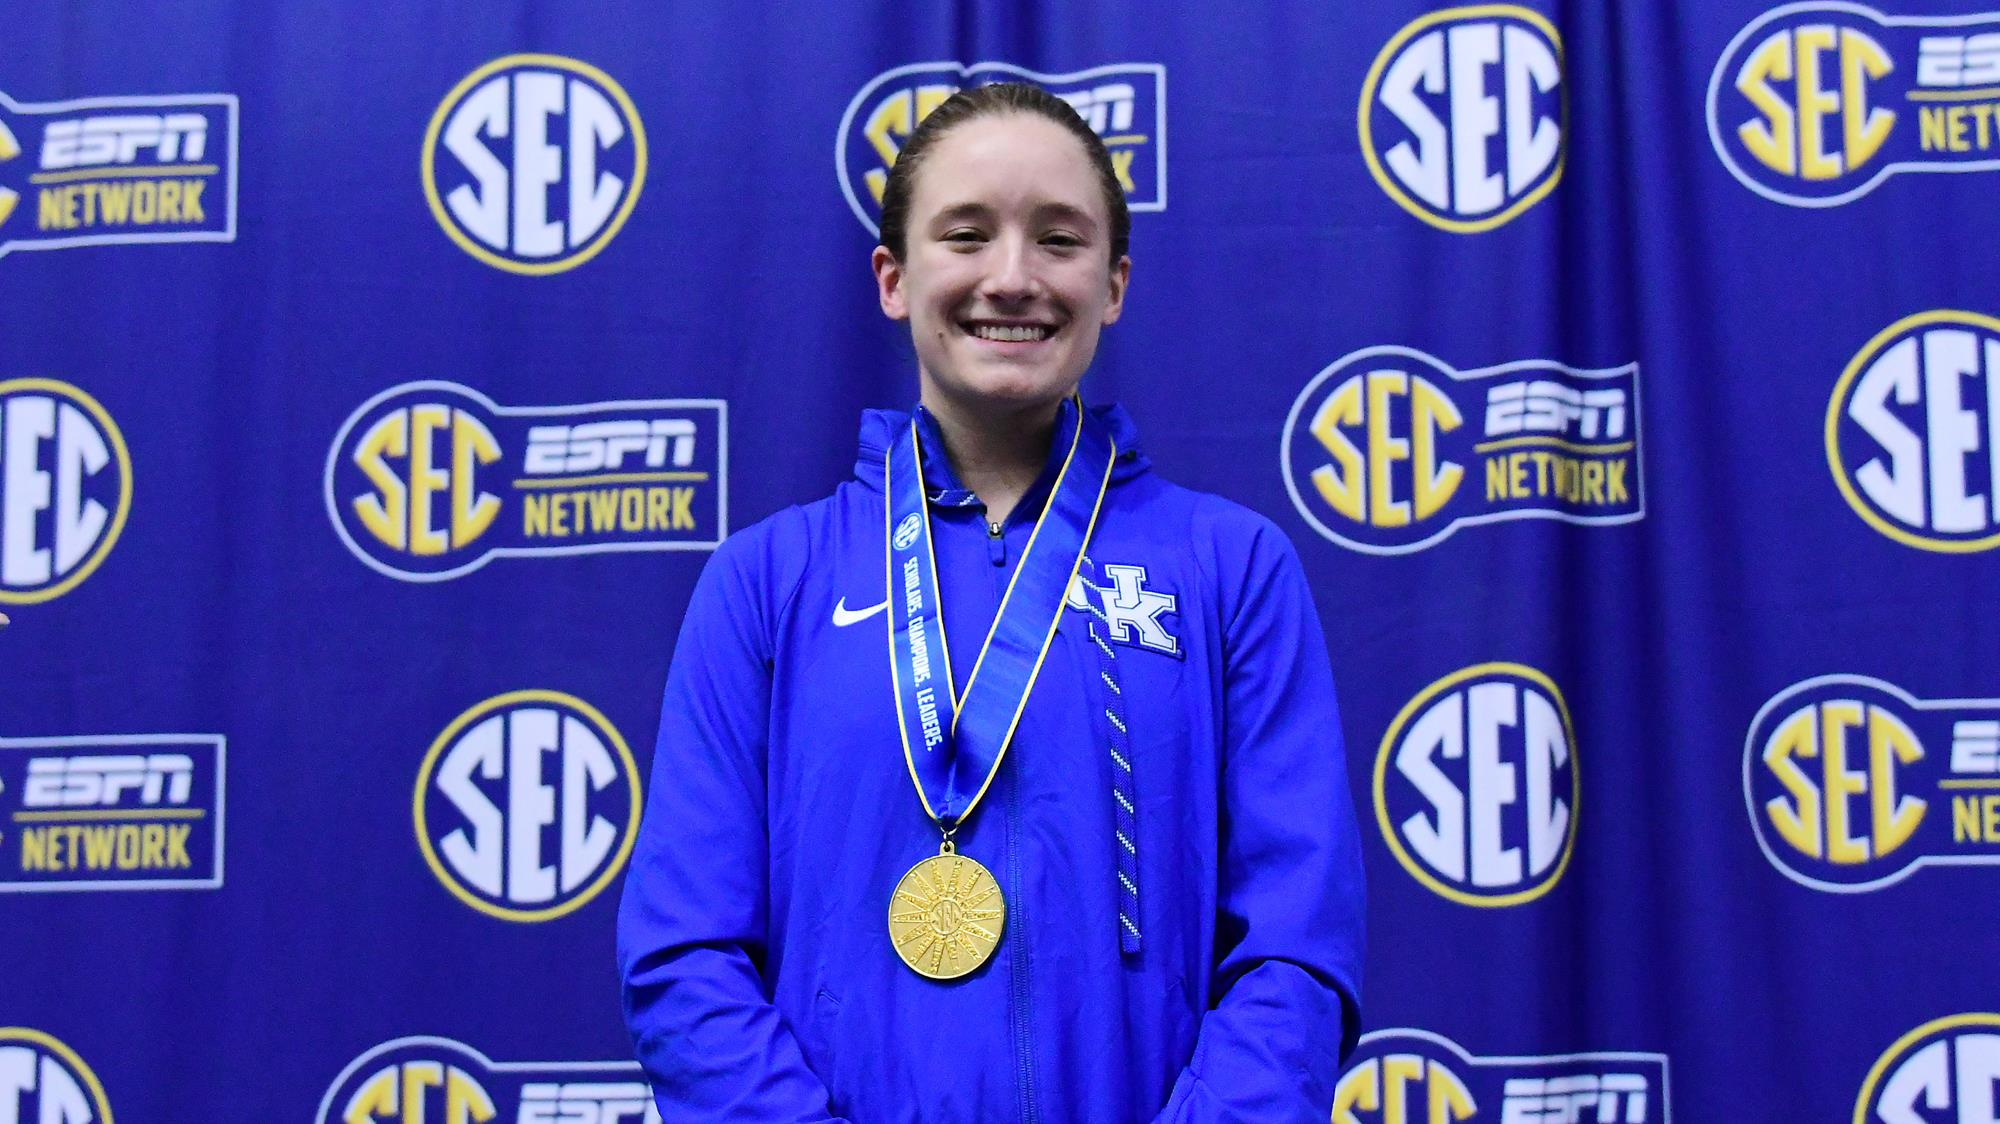 Knight Crowned SEC Champion on 3-Meter Springboard, Earning 2020 U.S. Olympic Trials Cut